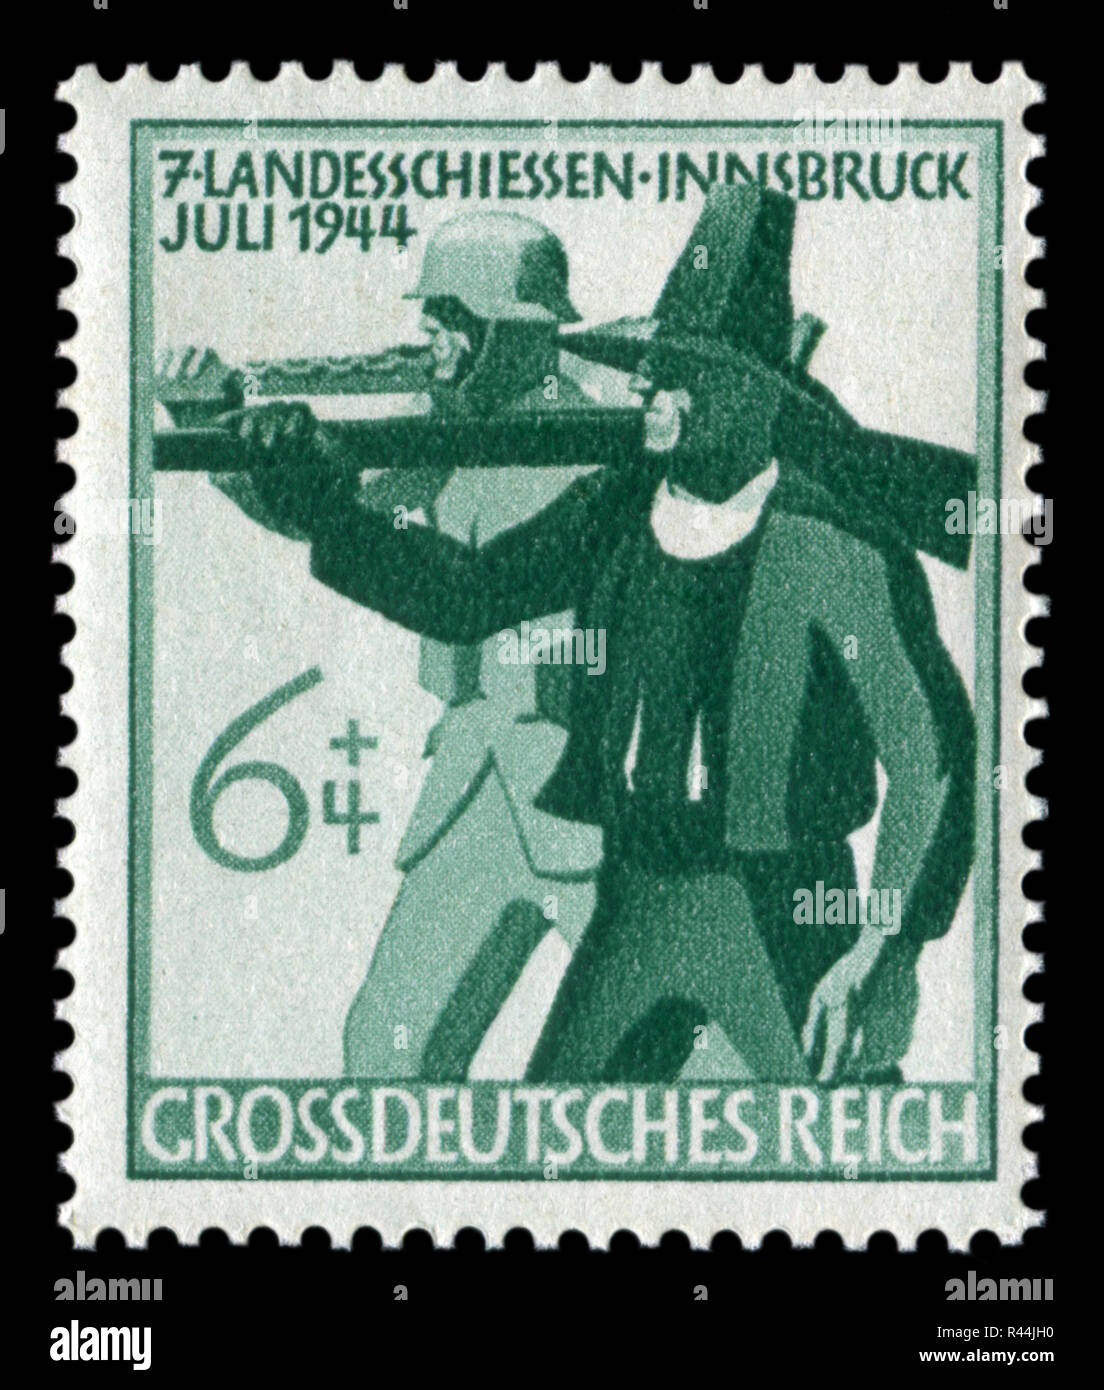 German historical stamp: 7th meeting of the Tyrolean Riflemen in Innsbruck. Tyrolean Rifleman with Arabella and soldiers with a machine gun. 1944 Stock Photo